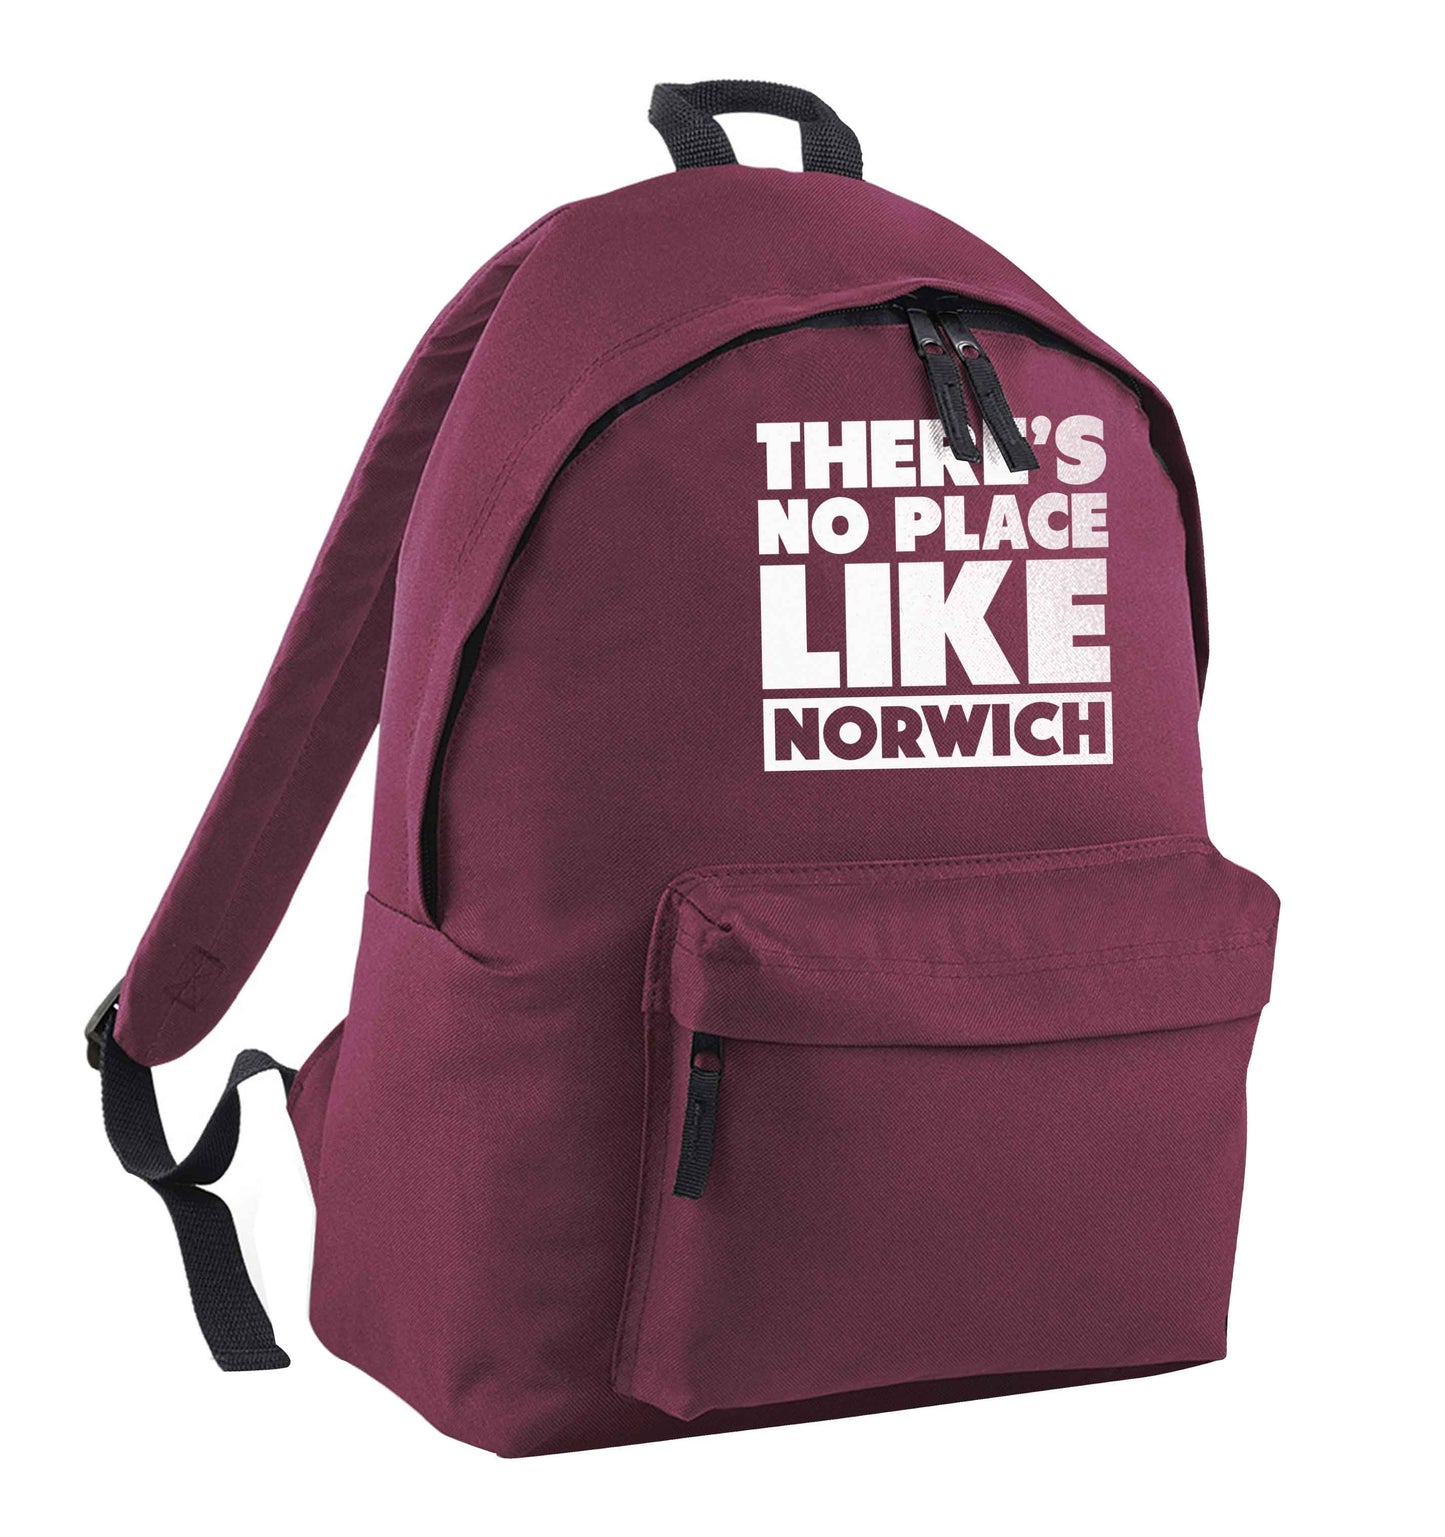 There's no place like Norwich maroon adults backpack